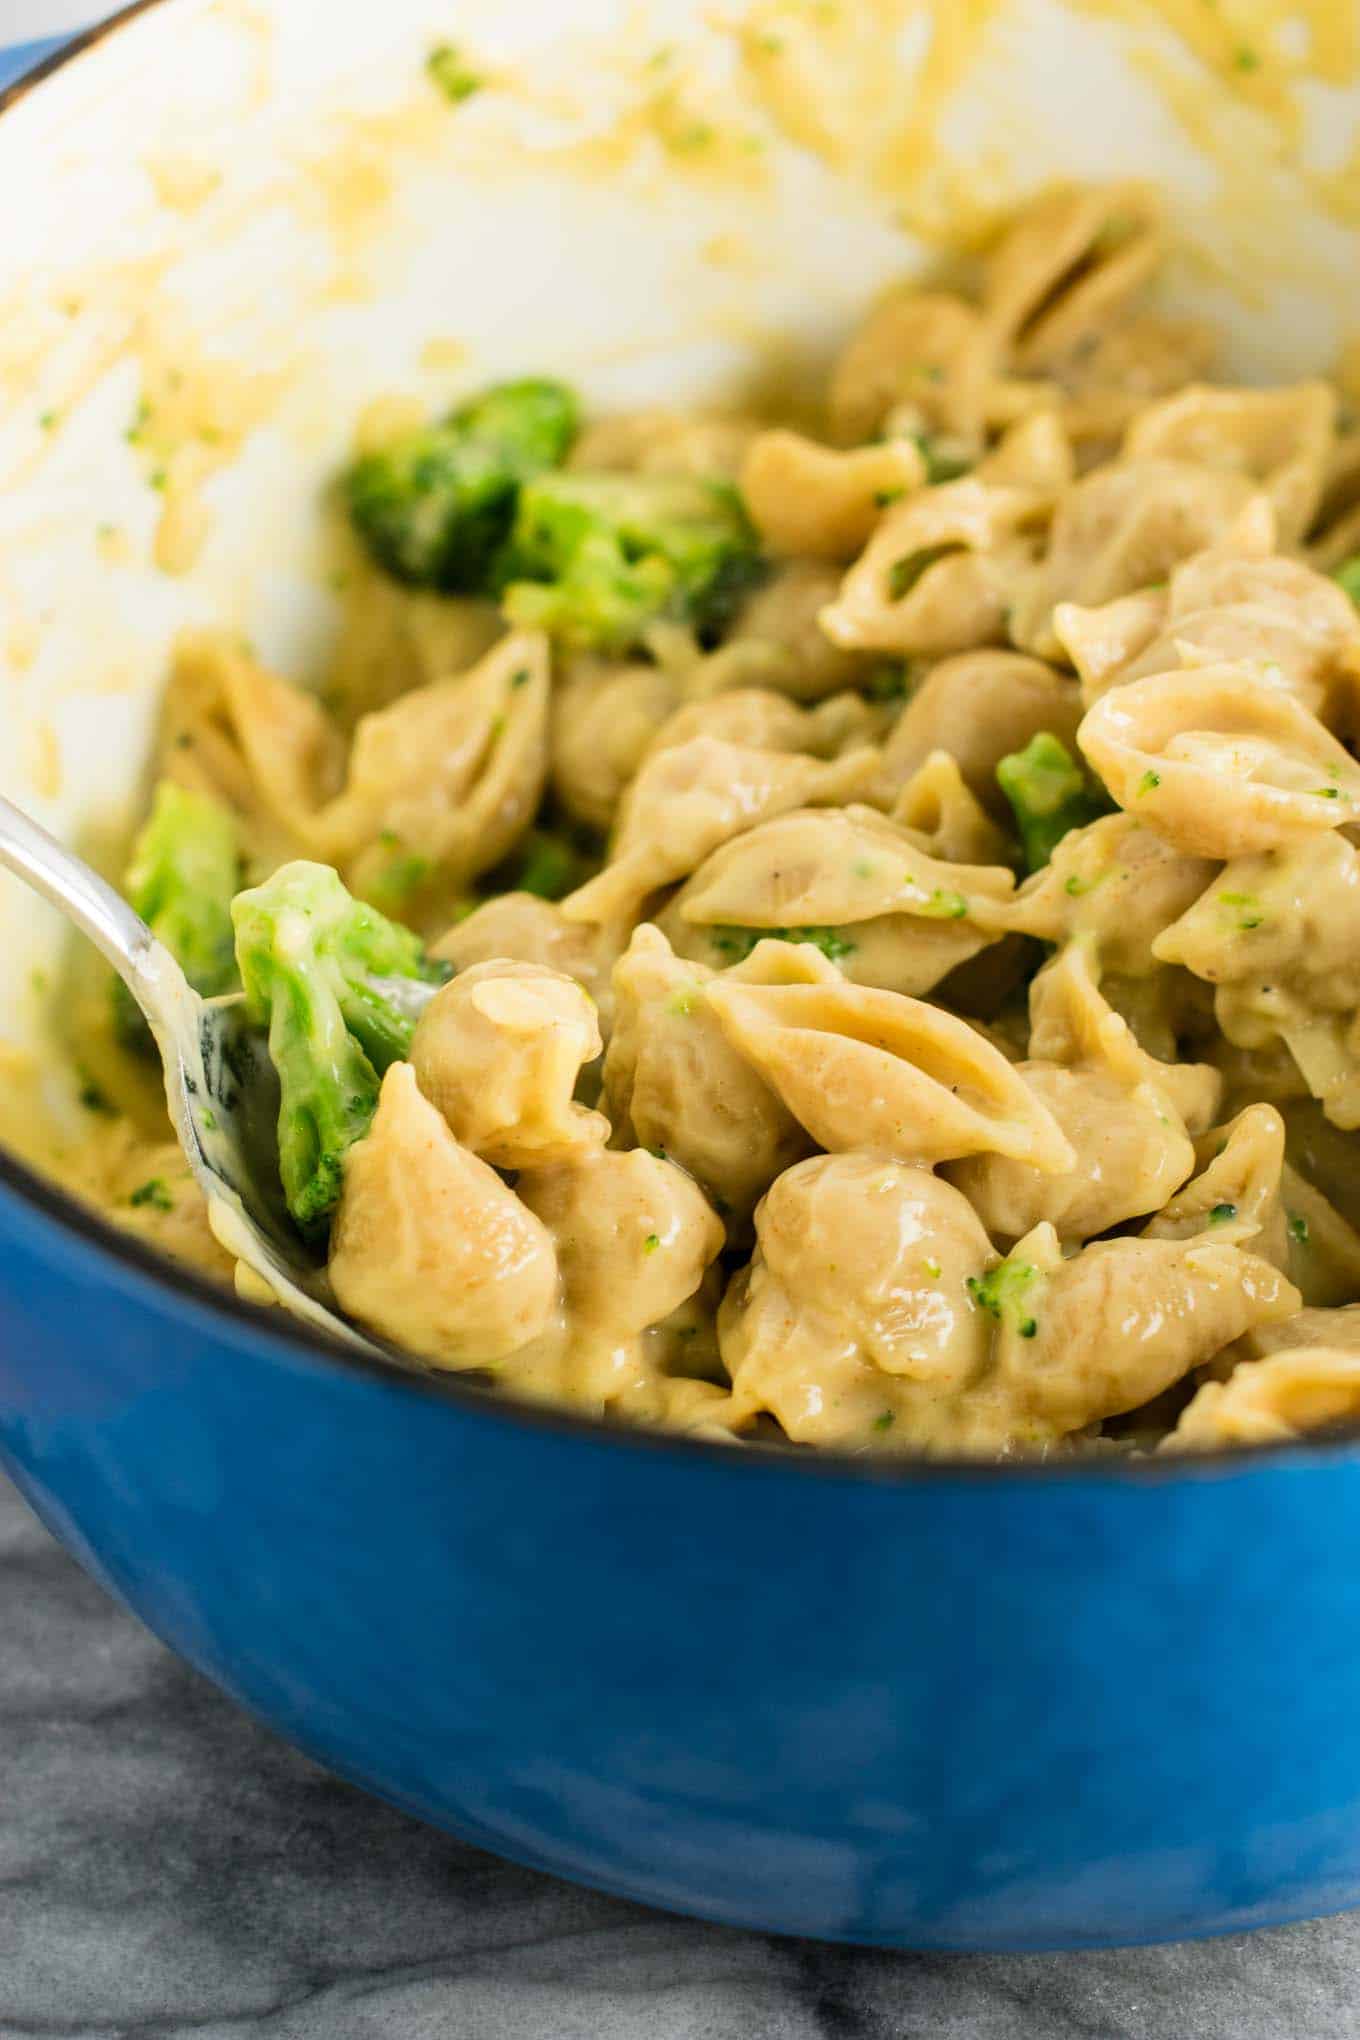  broccoli mac and cheese with sharp cheddar cheese and whole wheat pasta. The healthiest way to justify eating macaroni and cheese for dinner. Kids will love this one! #broccolishellsandcheese #macandcheese #healthy #dinner #vegetarian #meatless #pasta #wholewheat